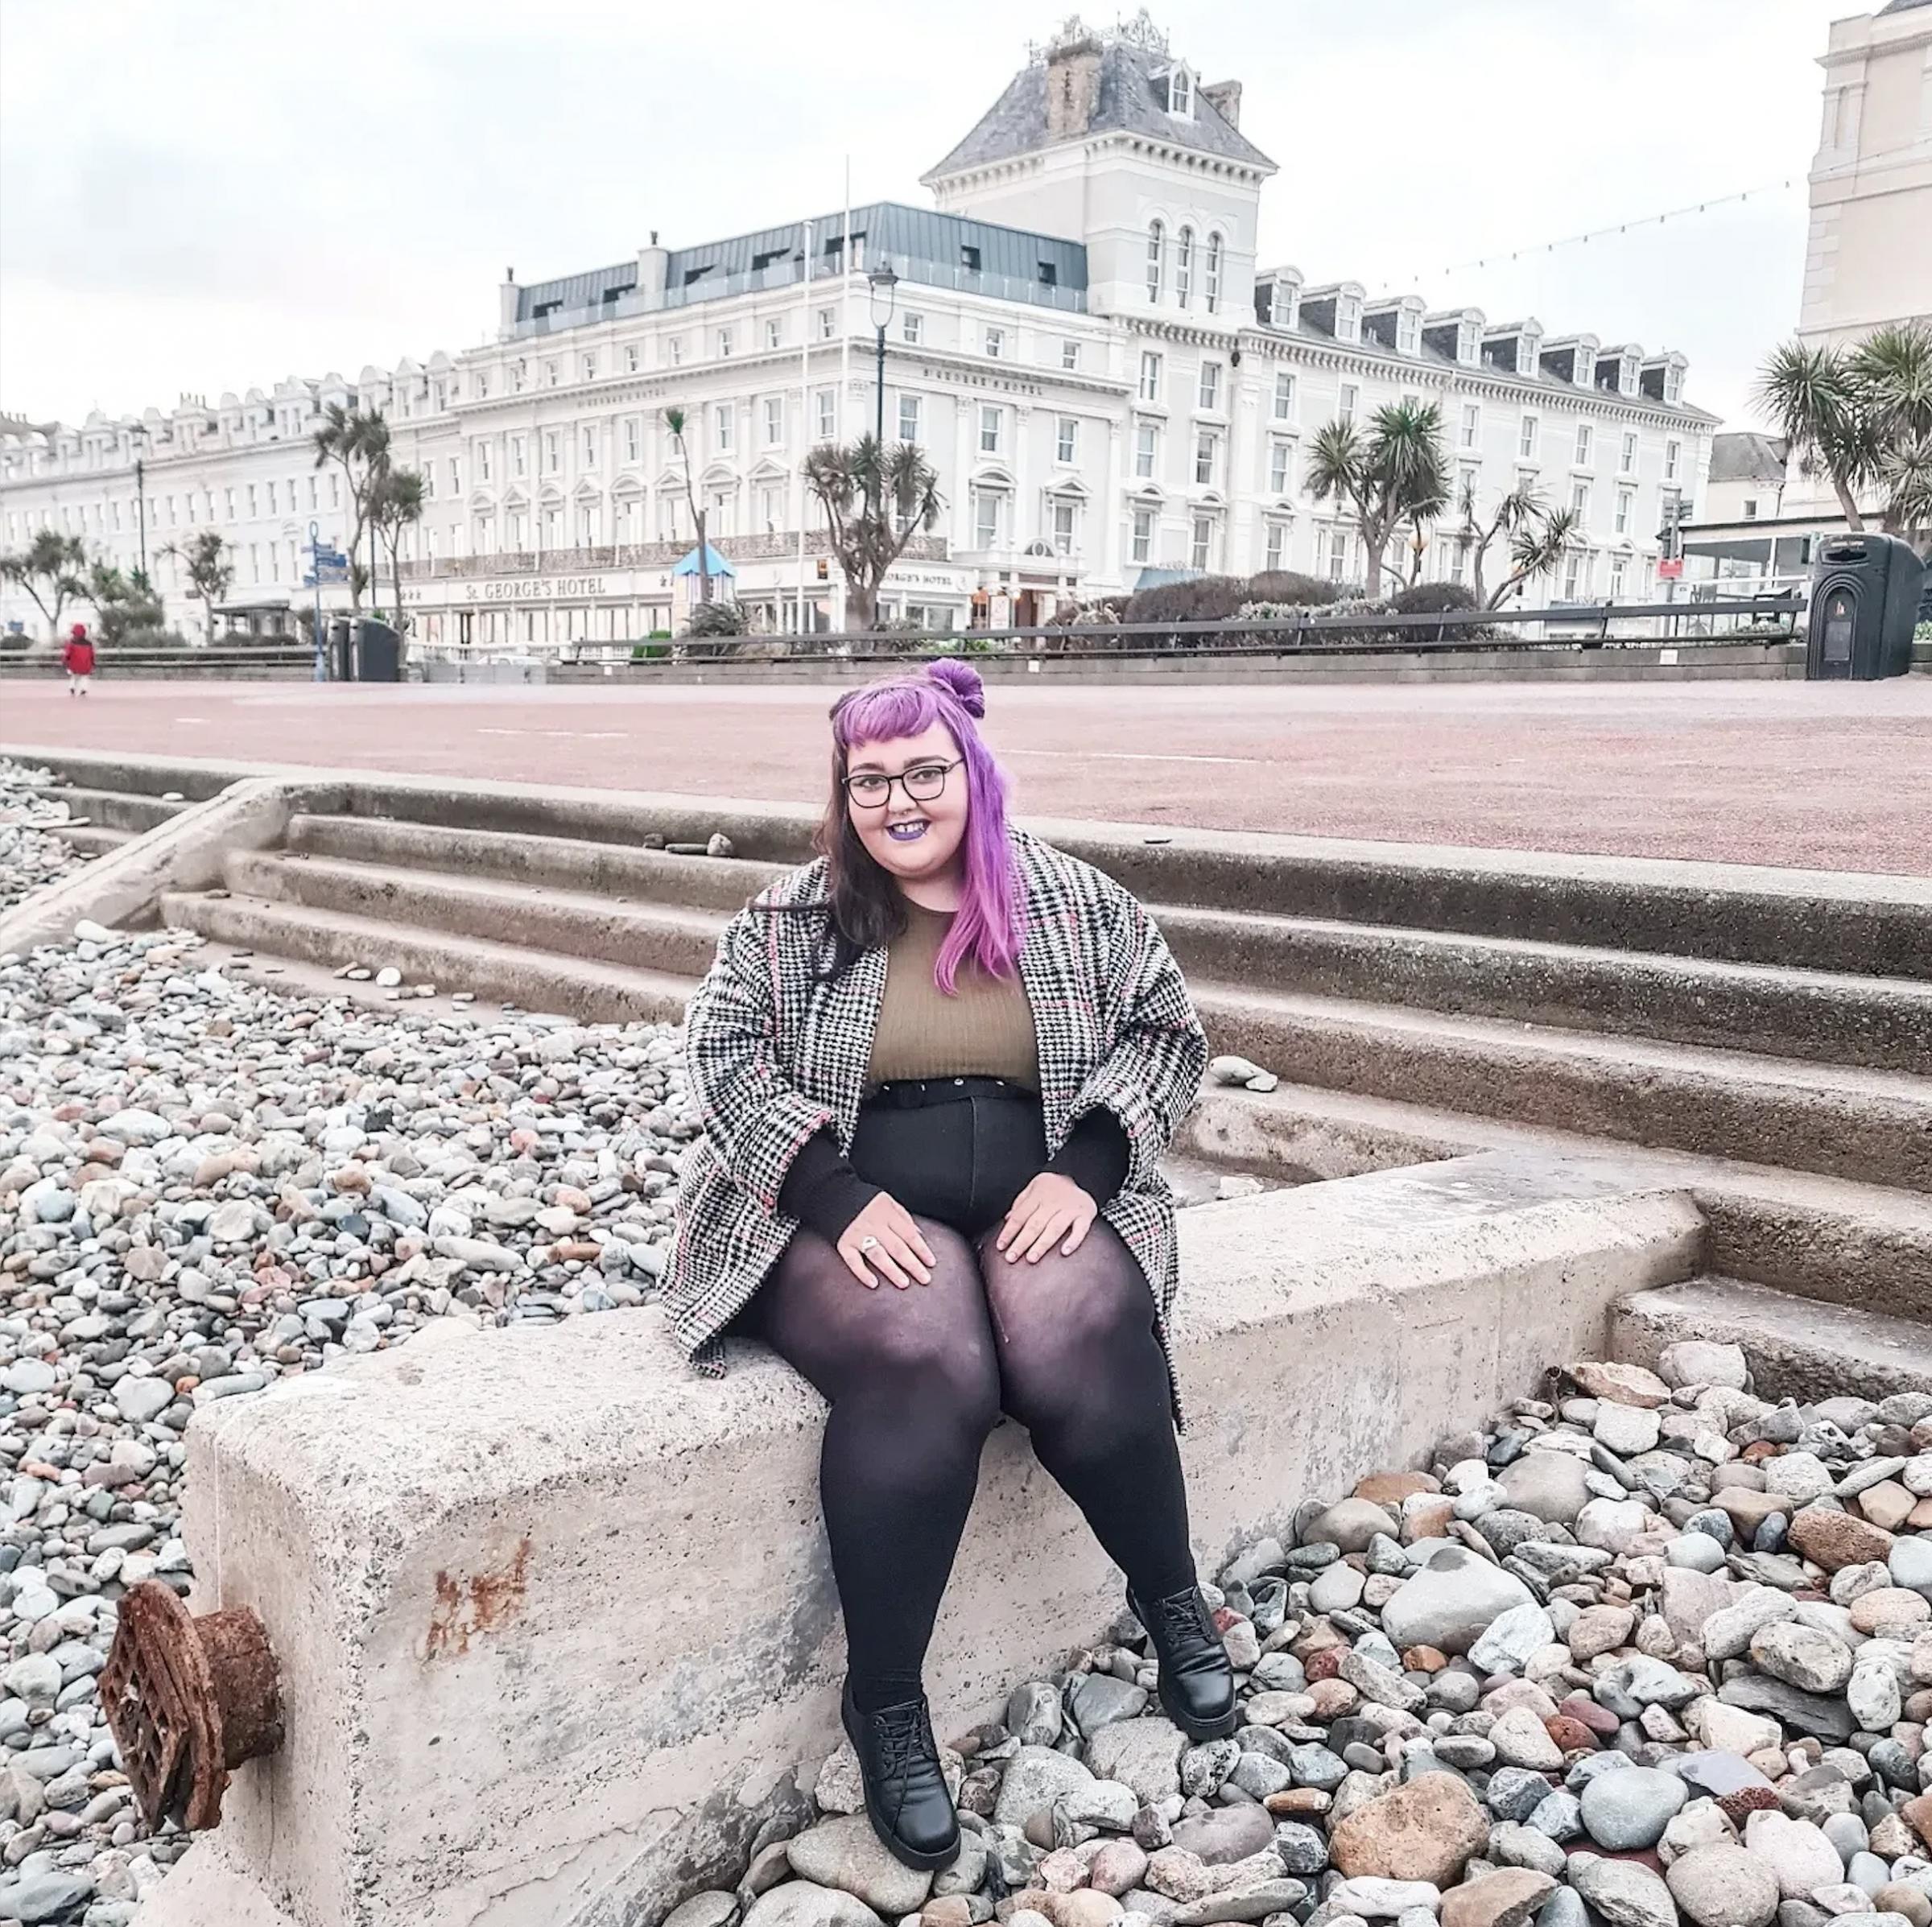 A plus-size Llandudno woman Beckie Bold bullied for her “granny legs” has embraced her body and feels “beautiful” in a bikini. Image: SWNS